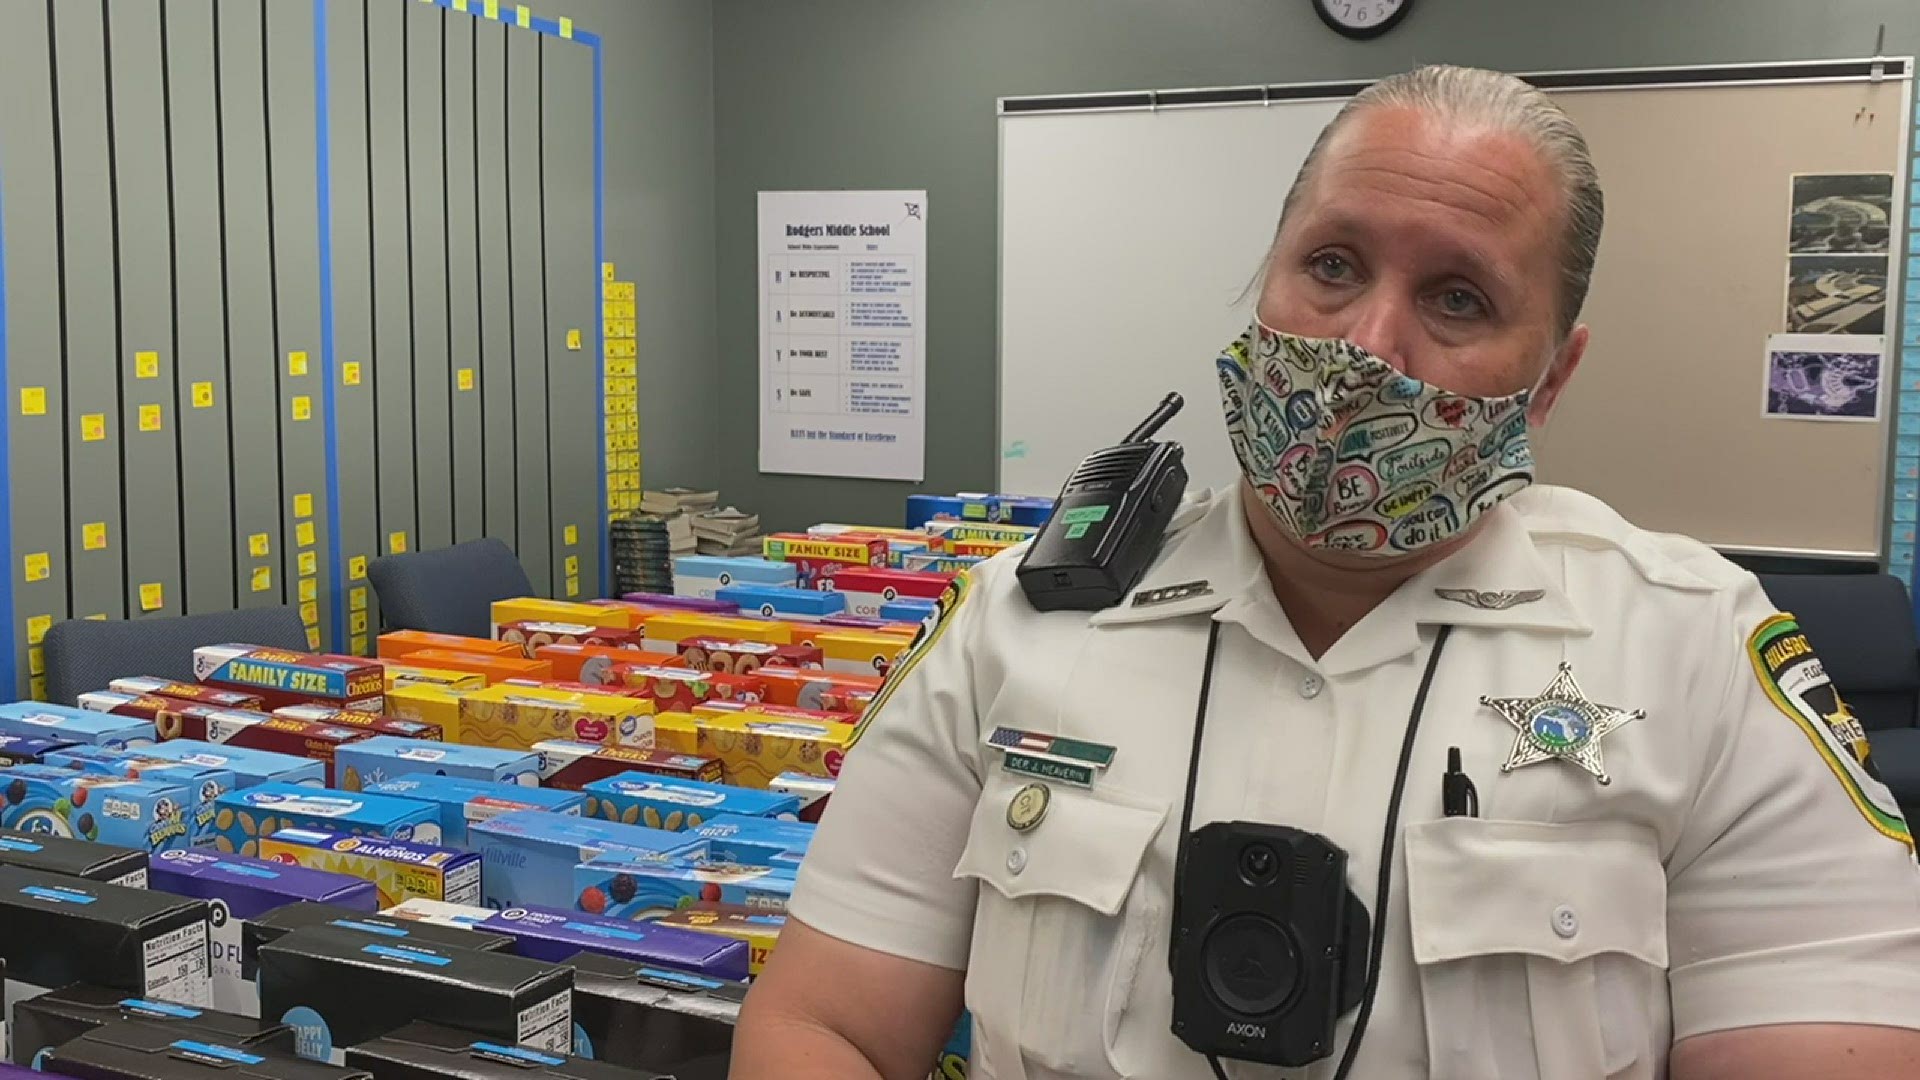 Deputy Heaverin helped create a food pantry for students in need at Rodgers Middle School.